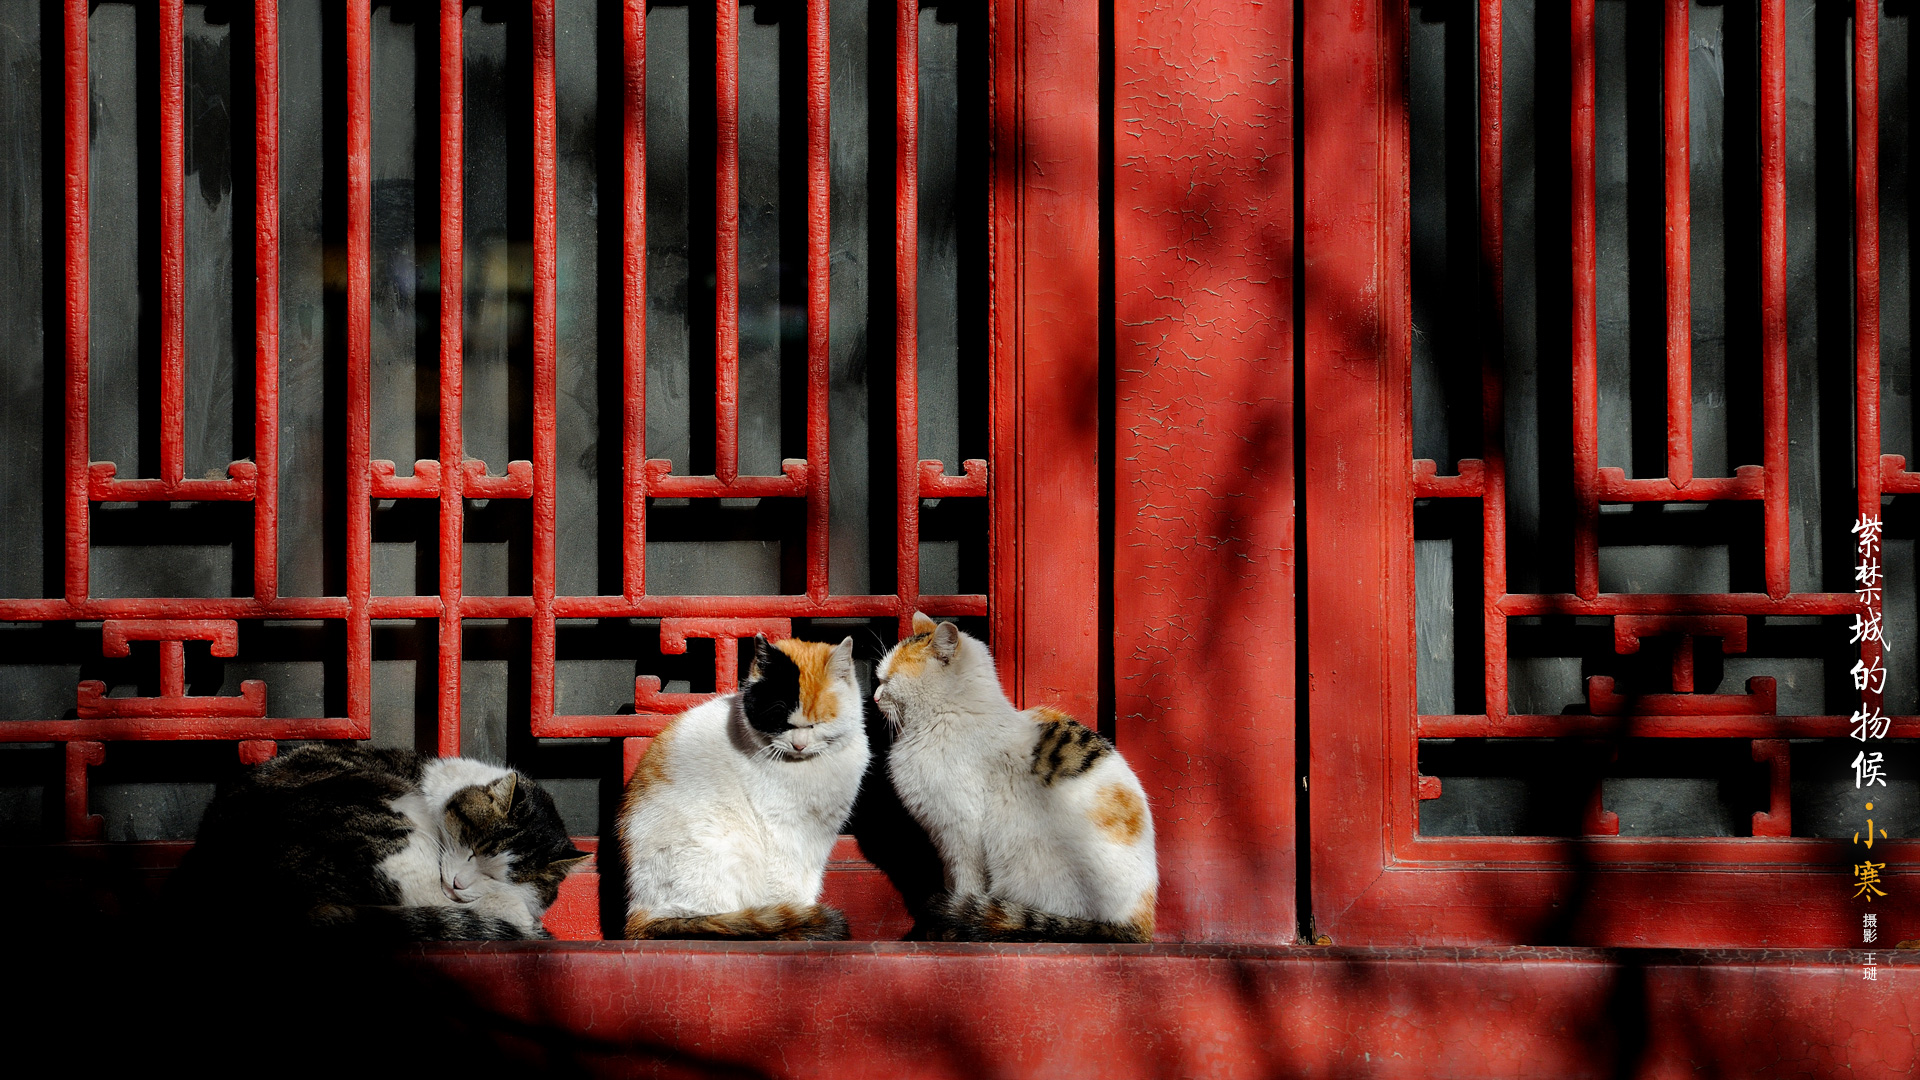 General 1920x1080 The Imperial Palace architecture cats